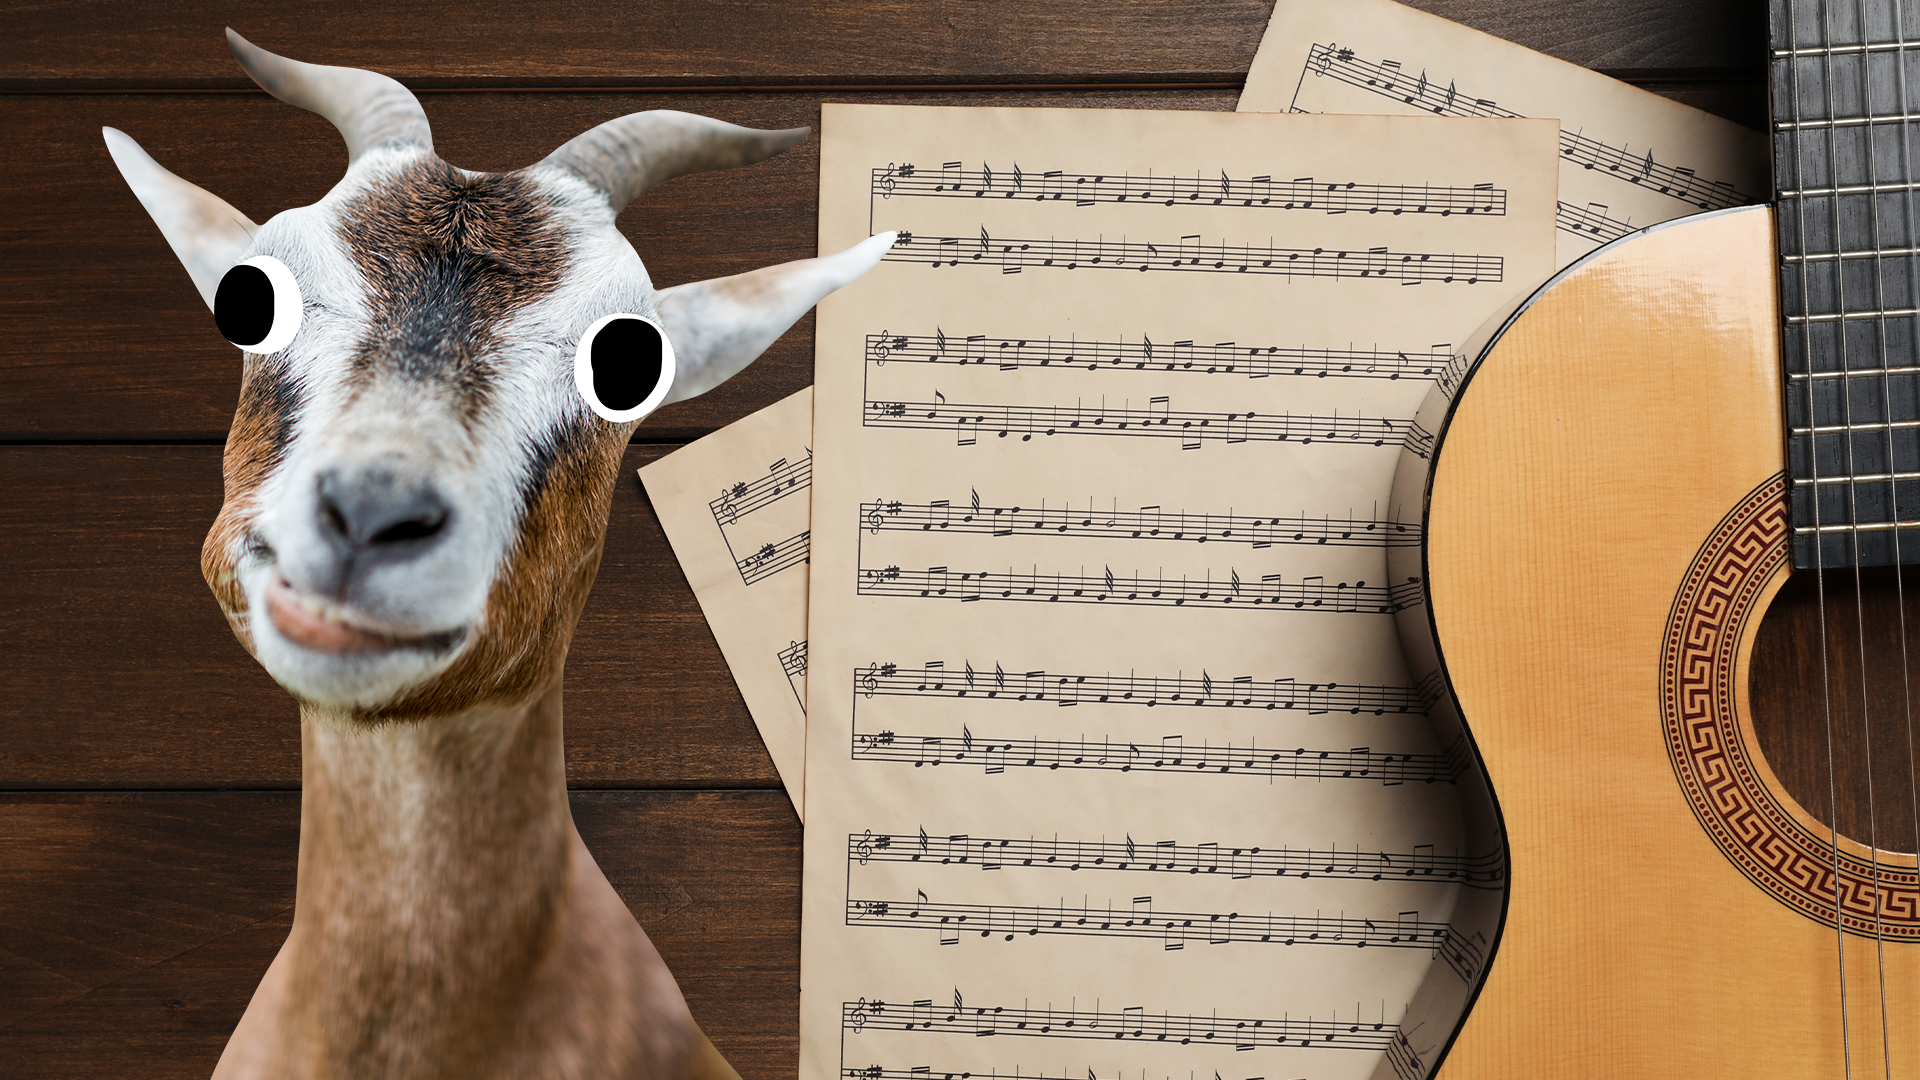 A derpy goat and some music and a guitar